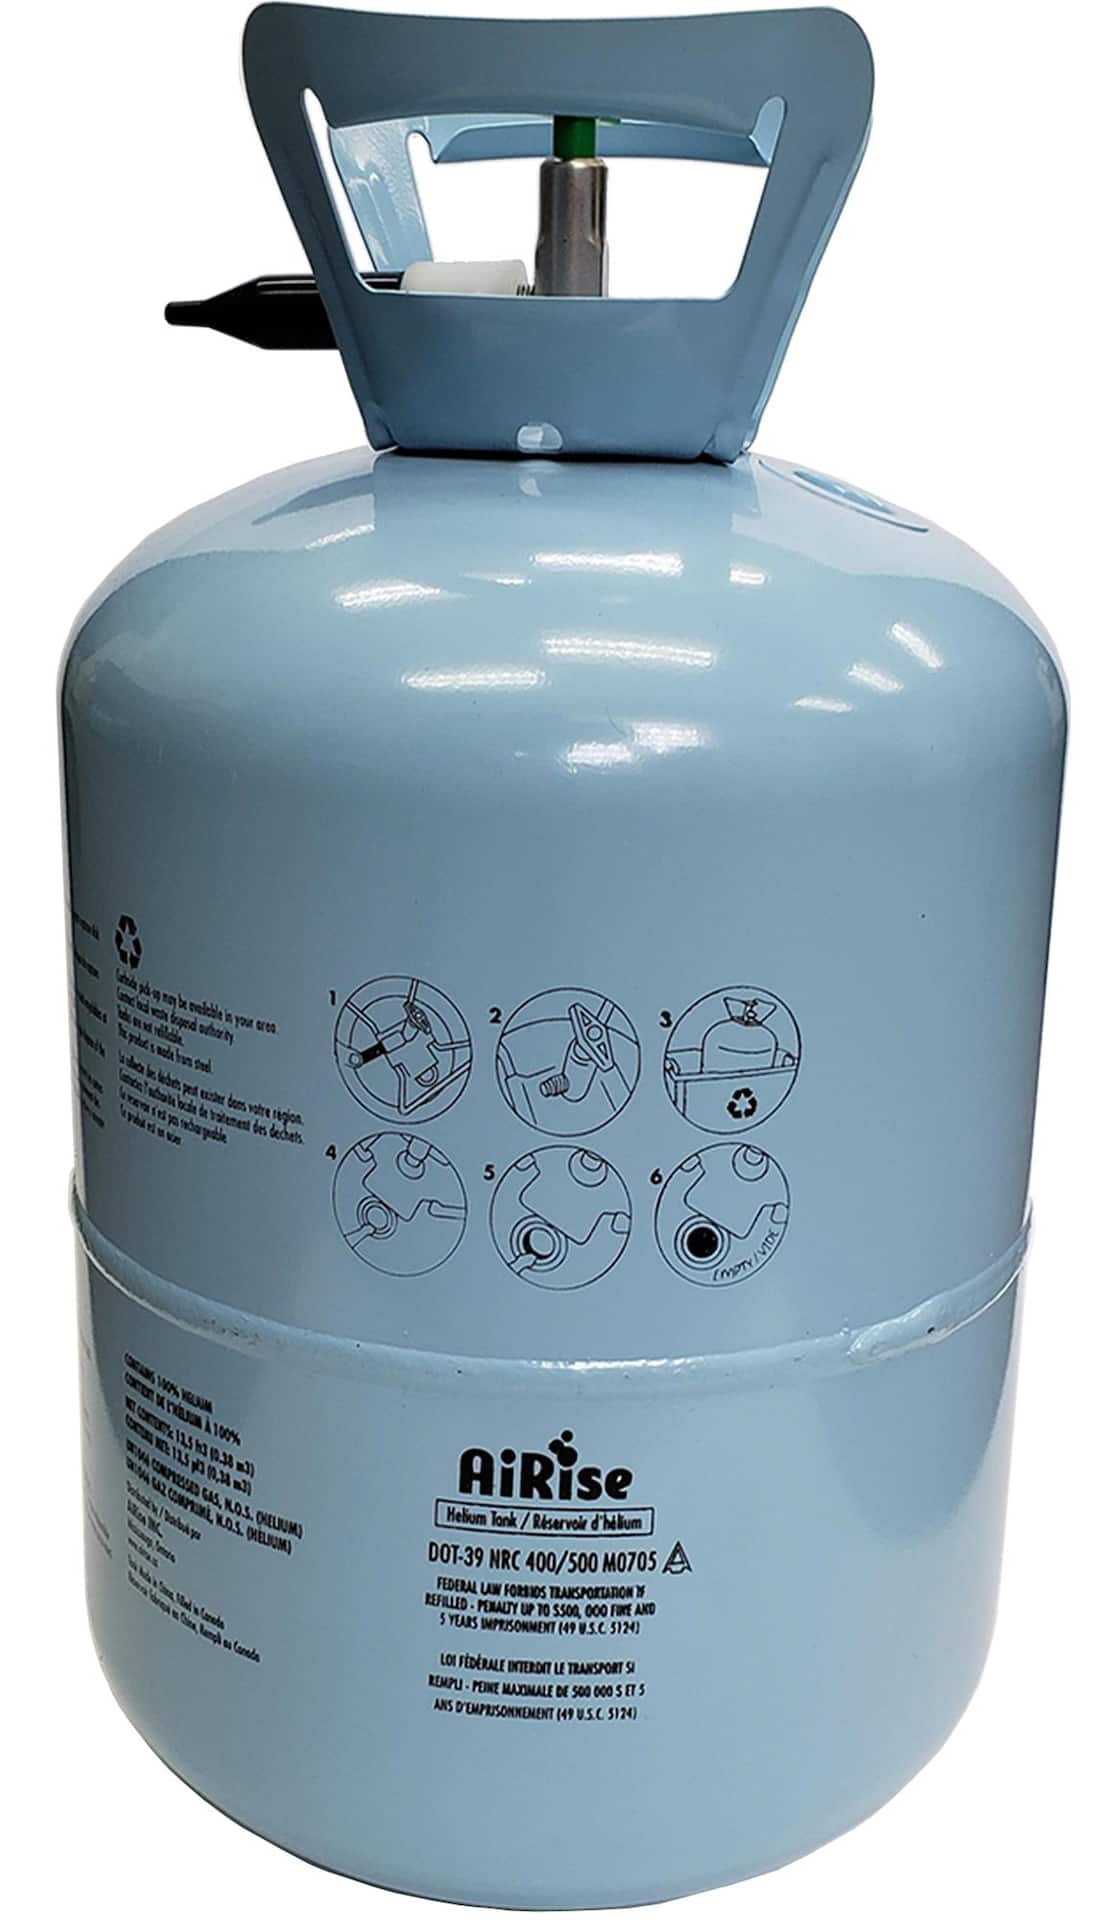 AiRise Large Portable Helium Tank, Blue, for Birthday/New Year's